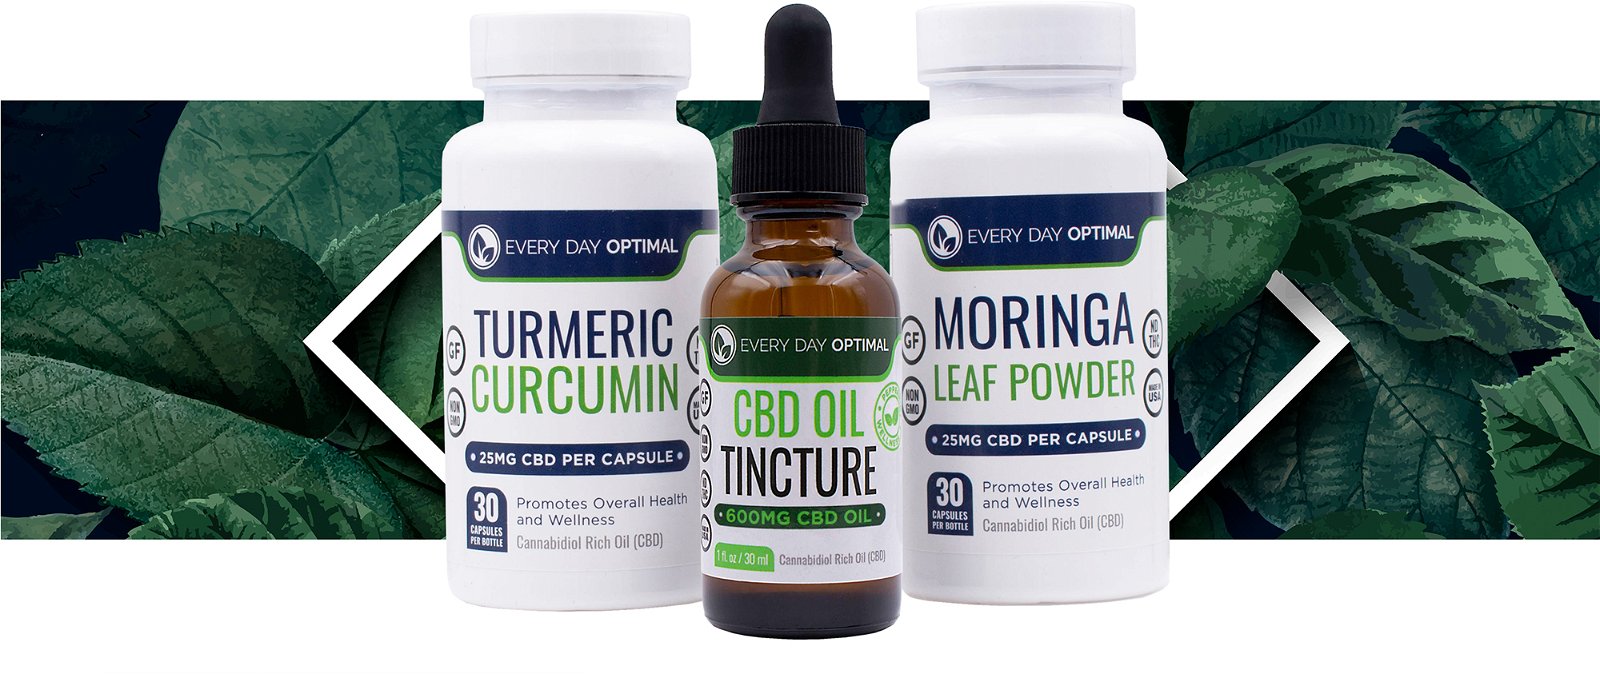 Moringa Capsules, CBD Oil Tincture, Turmeric Capsules on top of a background of leaves